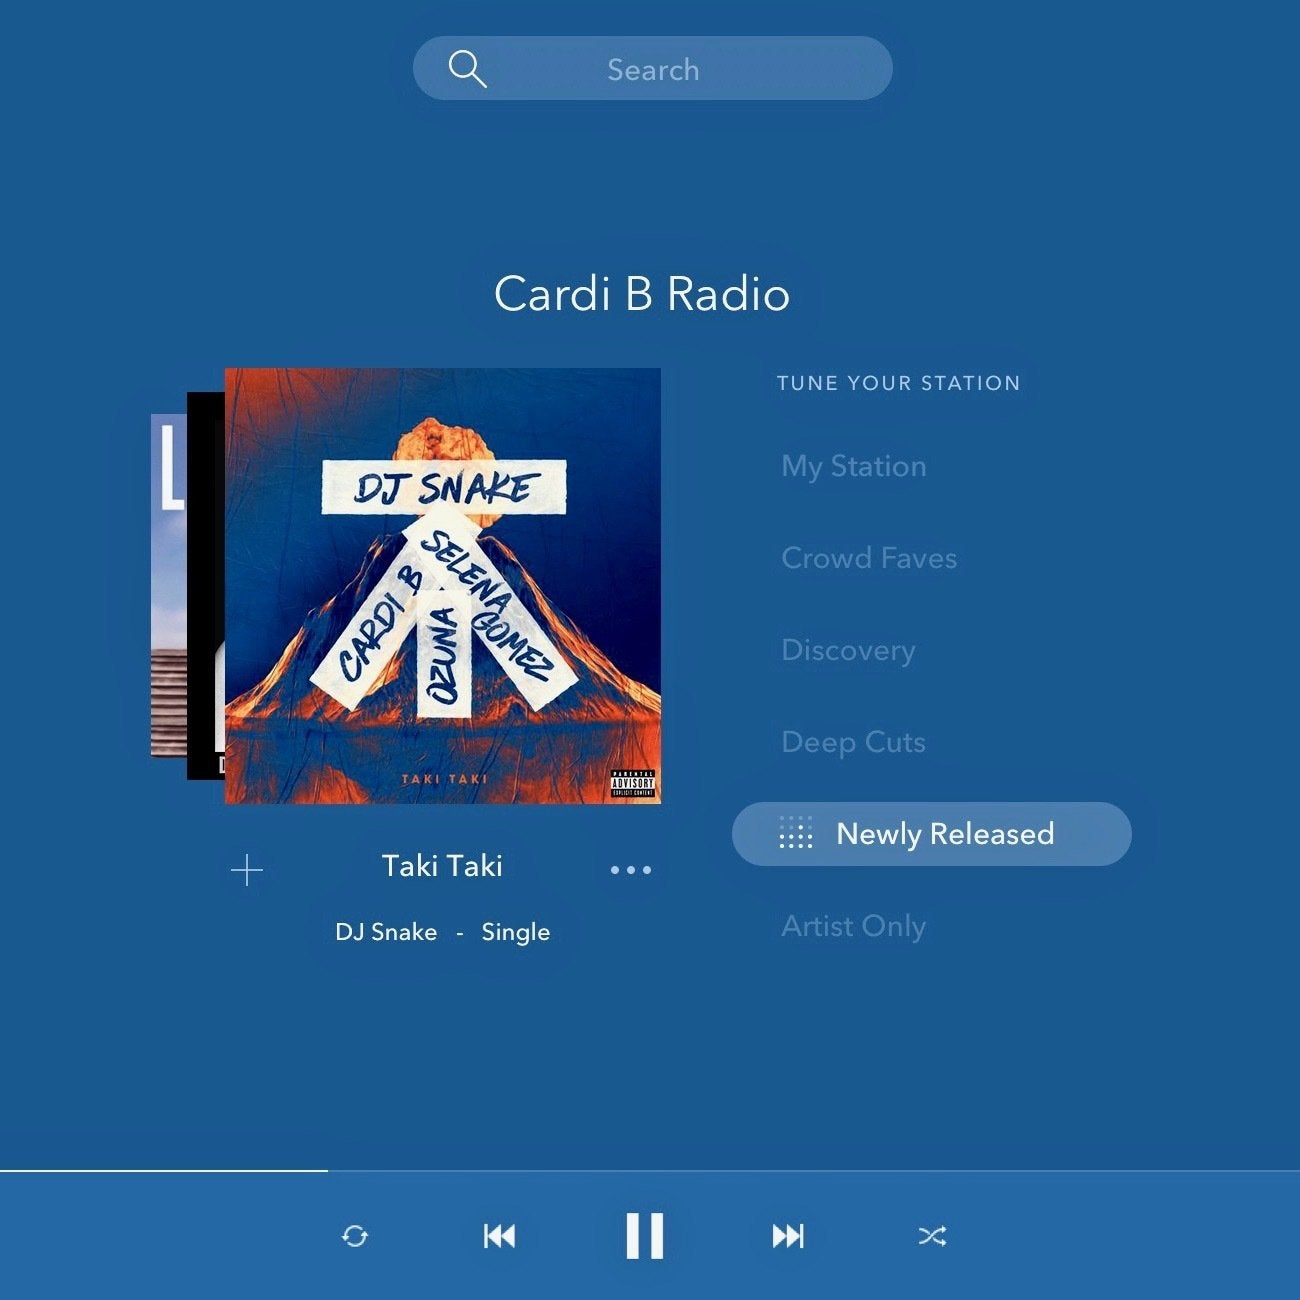 Pandora launches Modes, a new feature for free and premium listeners